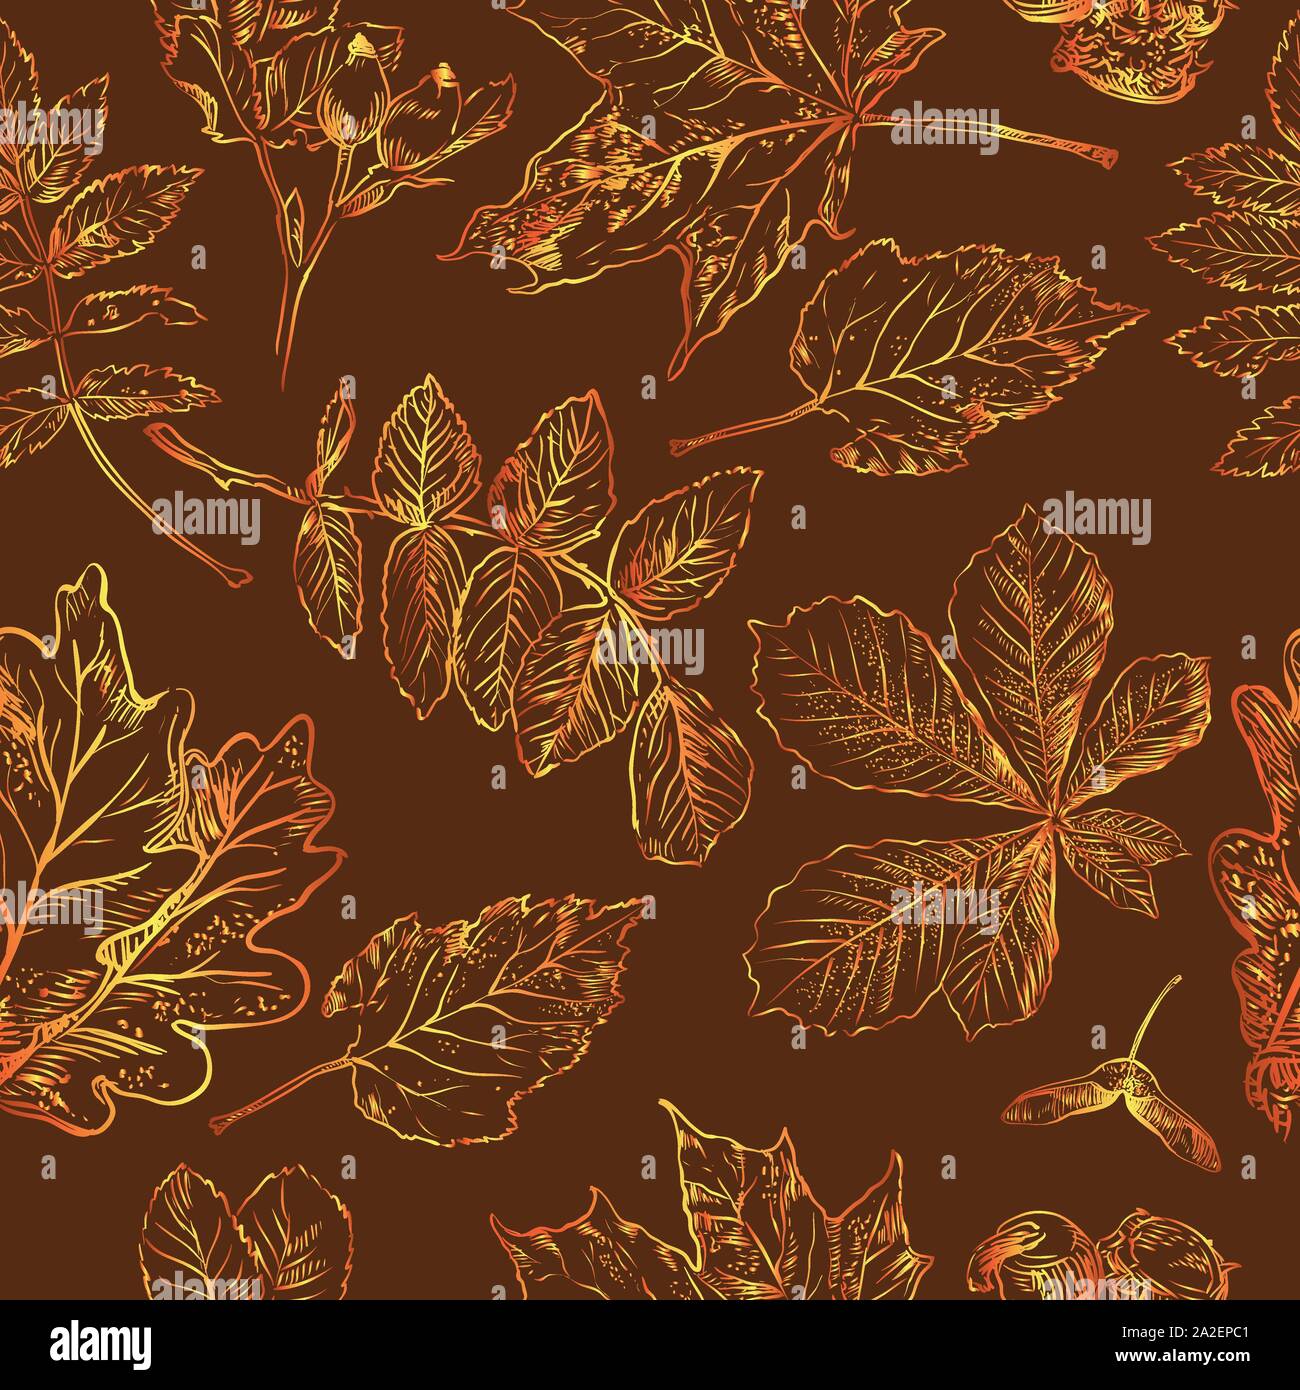 Vector autumn hand drawing seamless pattern with horse chestnut, hawthorn, rose hip, Rowan leaves outline on the brown background. Fall line art of fo Stock Vector